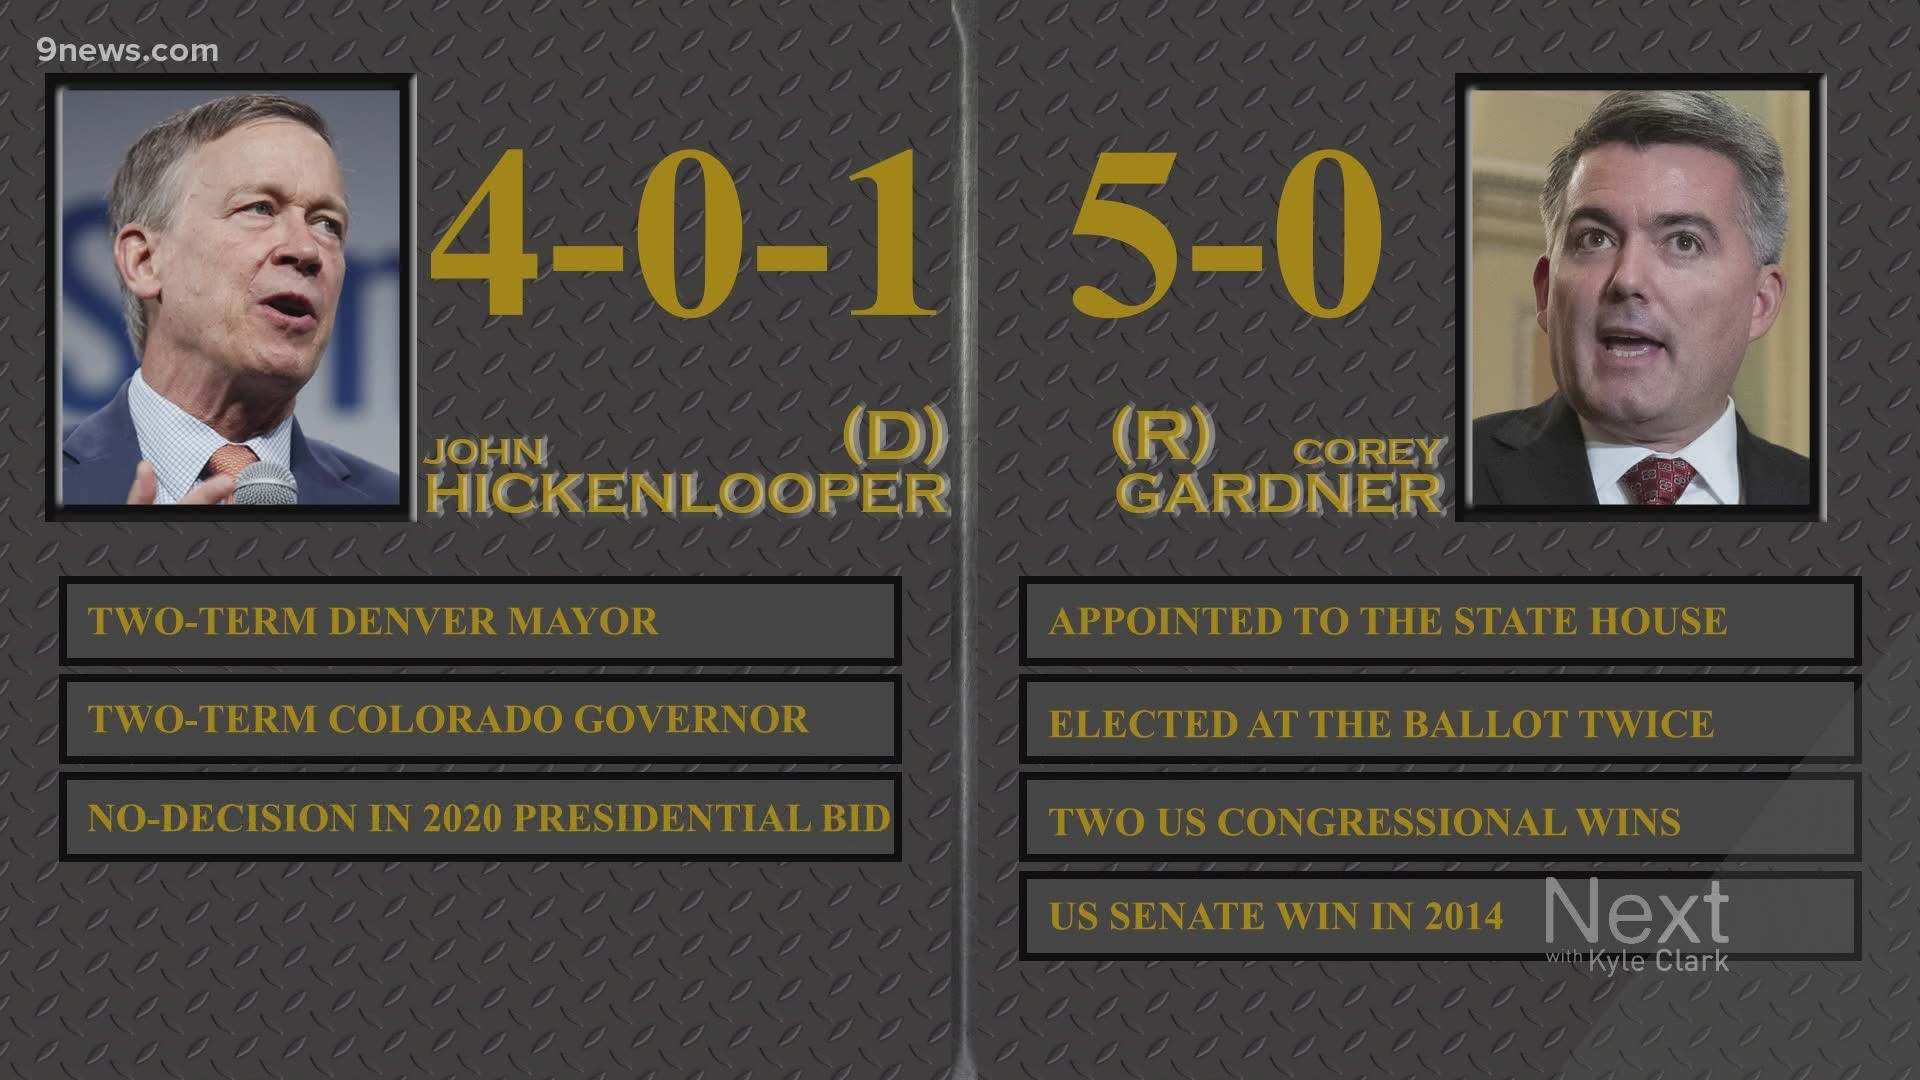 Both Republican Cory Gardner and Democrat John Hickenlooper have not lost an election. That will change for one of them come November.